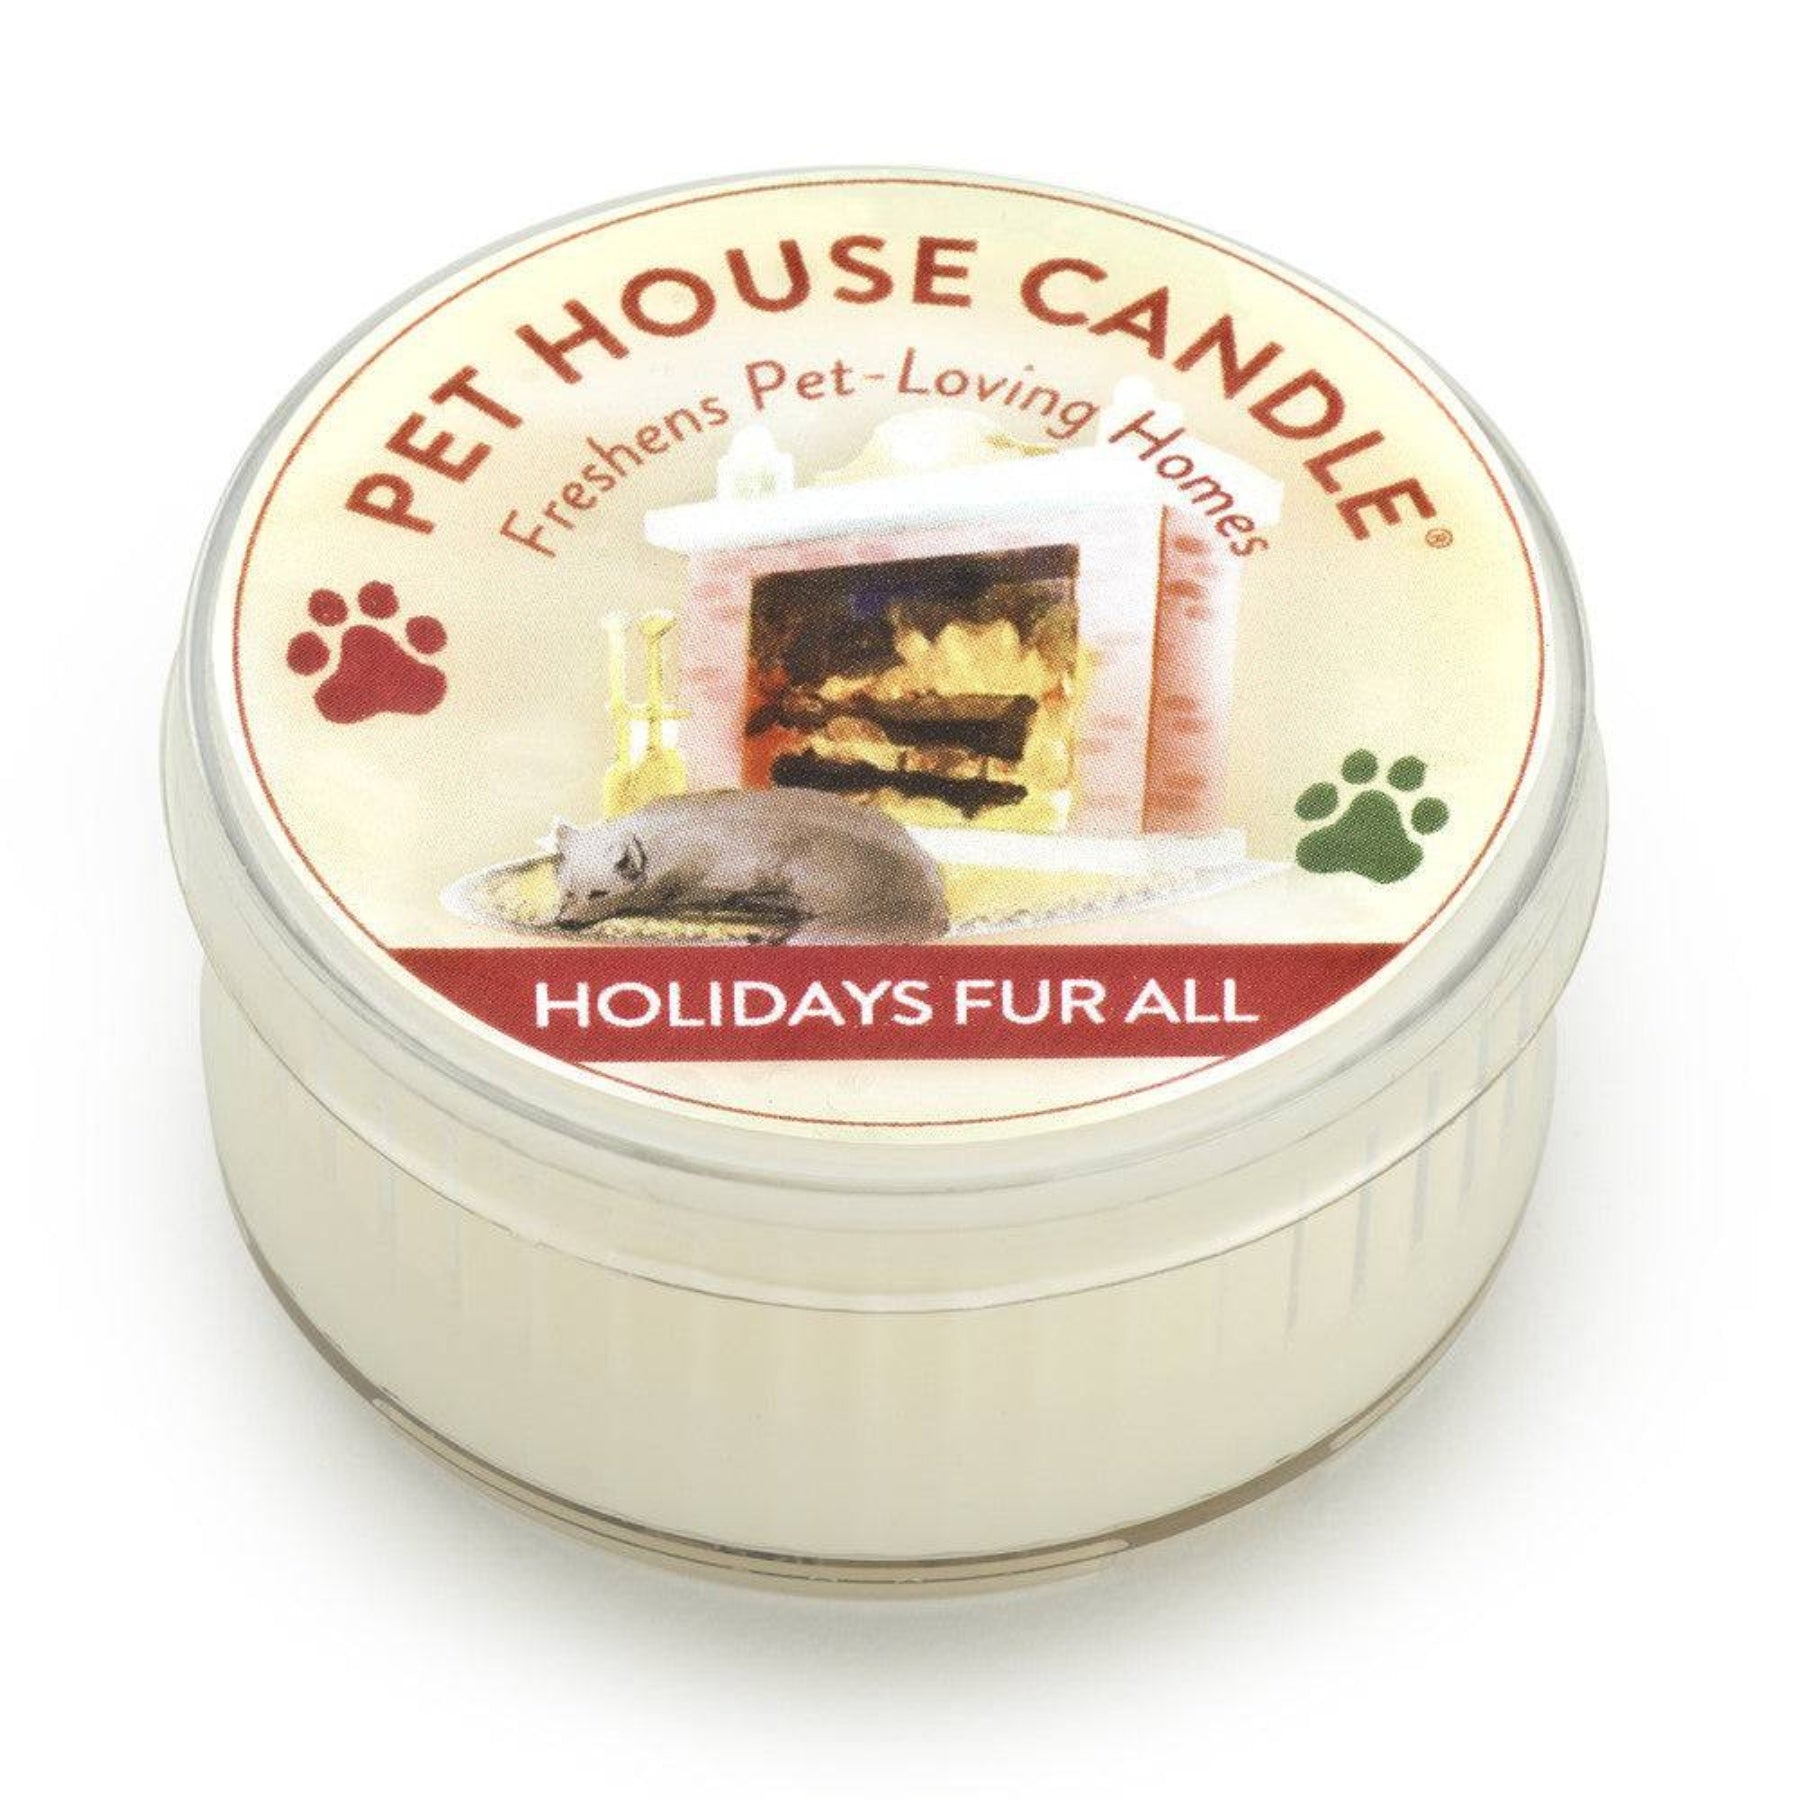 One Fur All Pet House Mini Candle - Holiday Fur All - Pooch Luxury